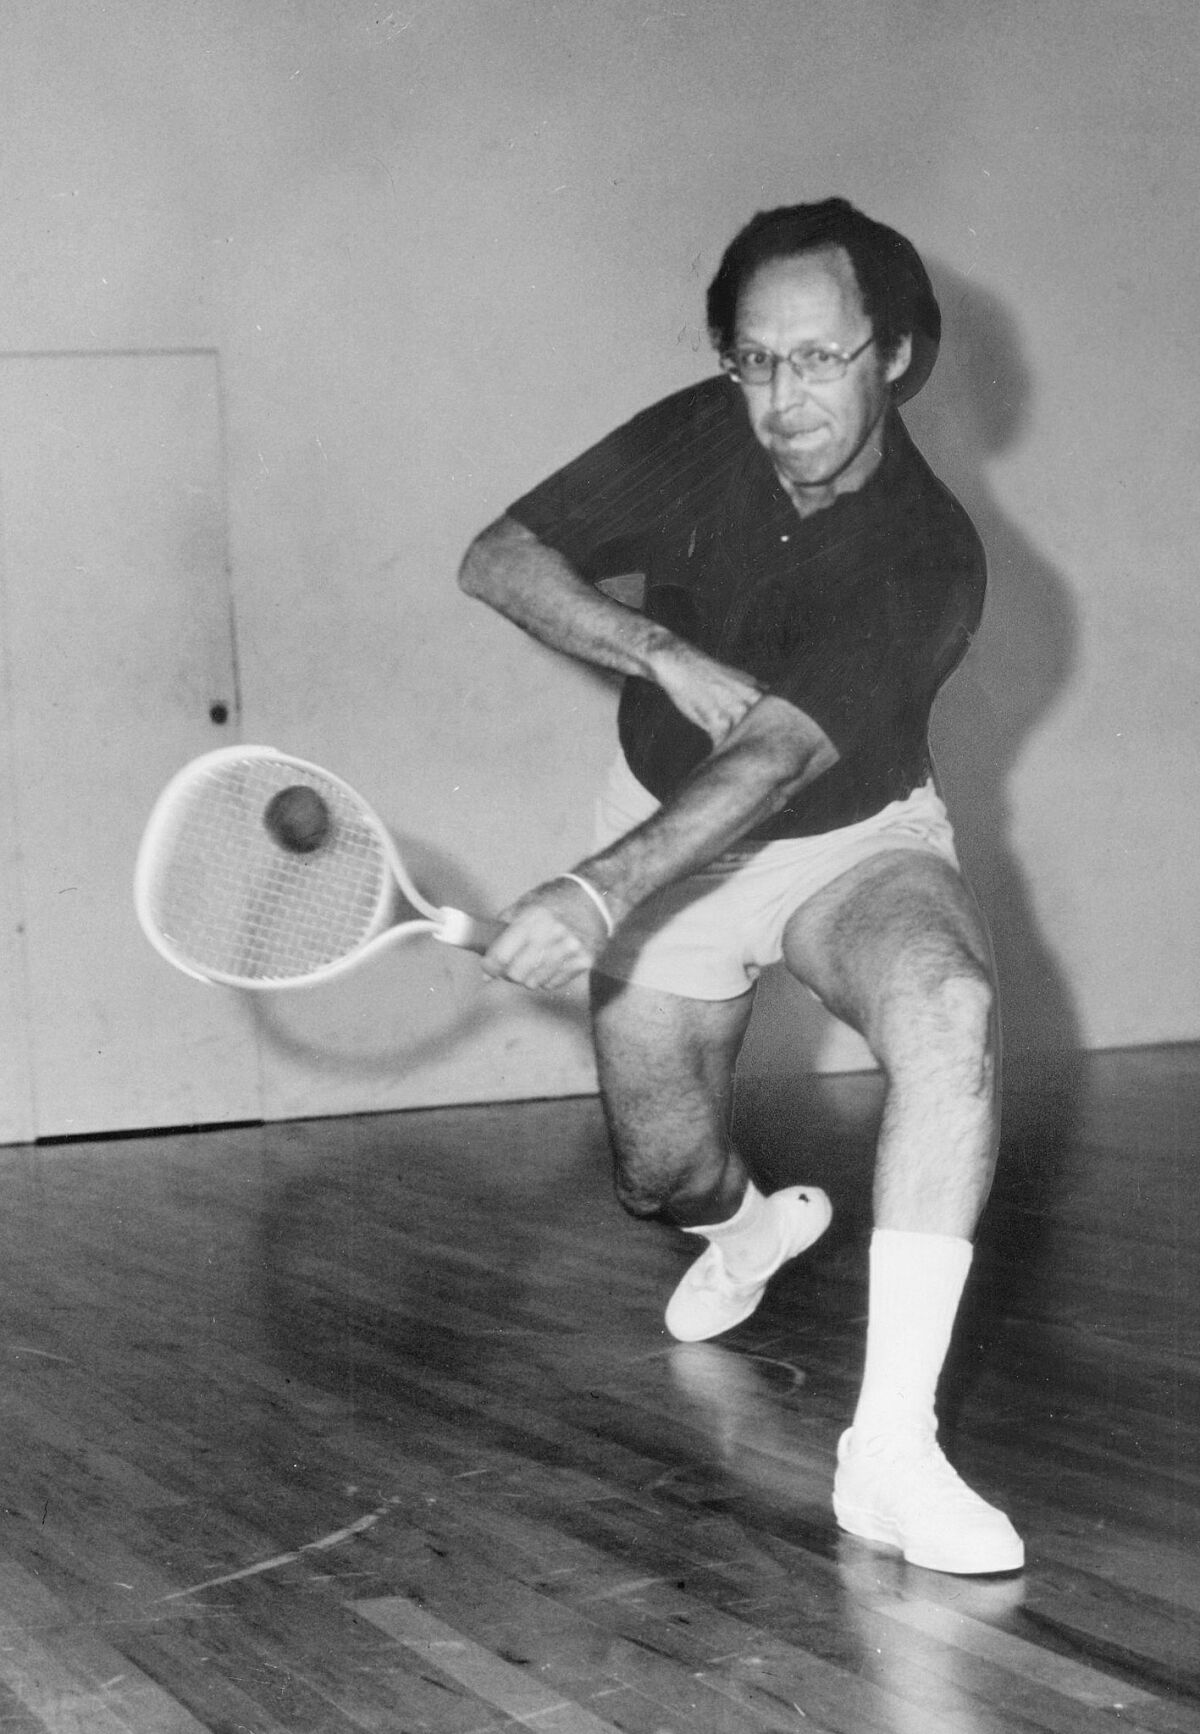 Dr. Bud Muhleisen. Bud was responsible for turning San Diego in to the Mecca of racquetball and organizing the first National and International events as well as starting the first racquetball club. (Bud Muehleisen)